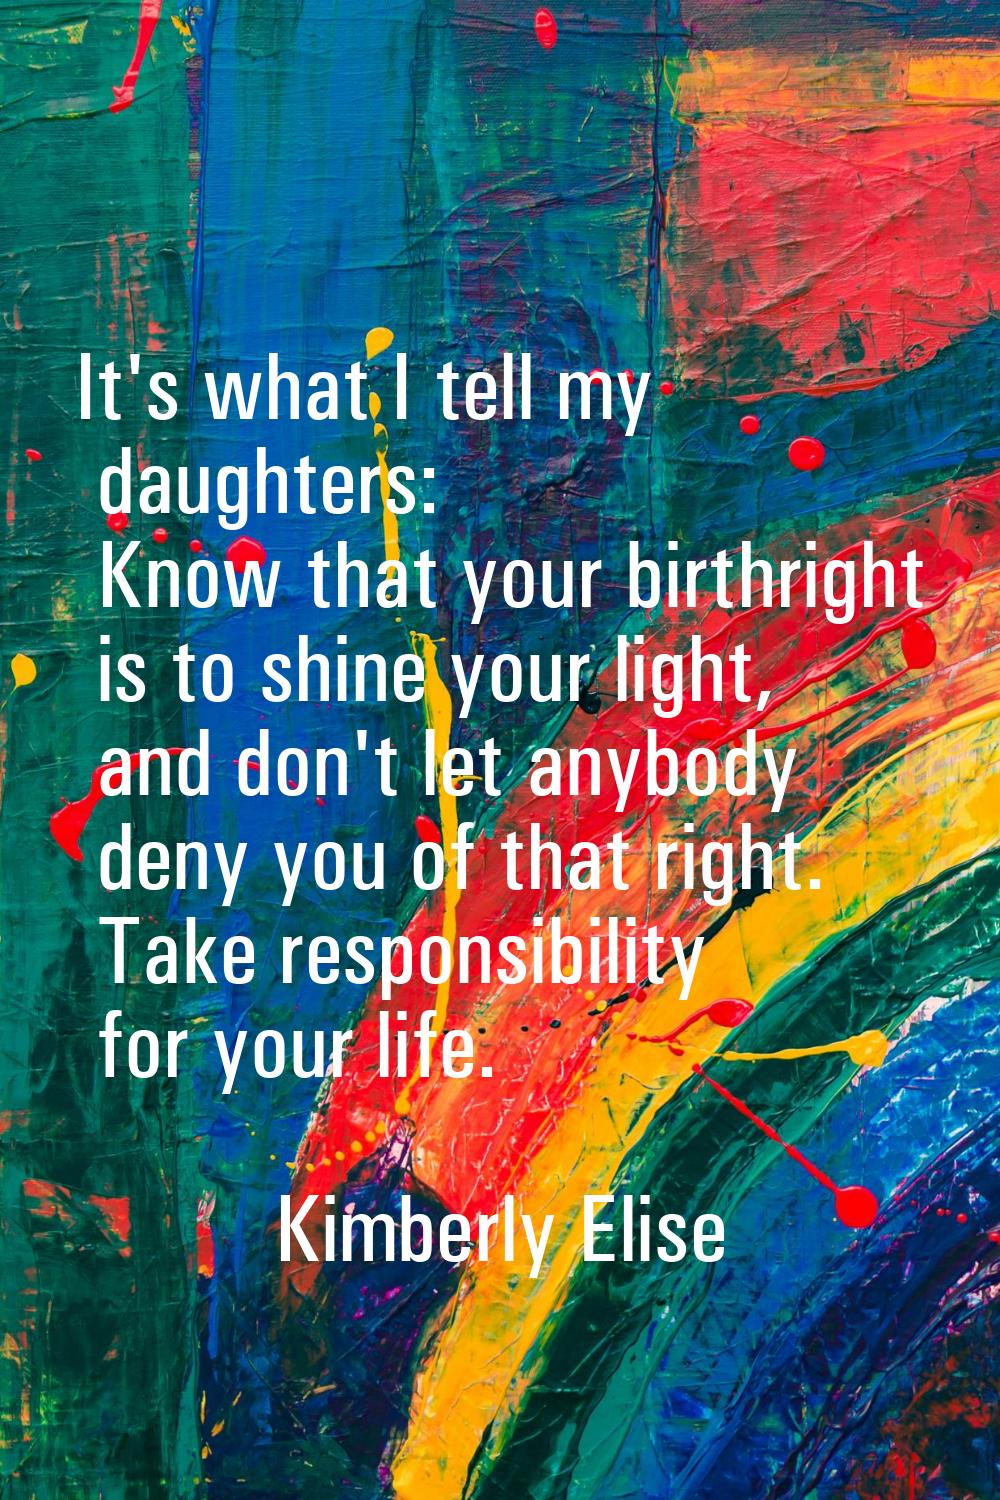 It's what I tell my daughters: Know that your birthright is to shine your light, and don't let anyb